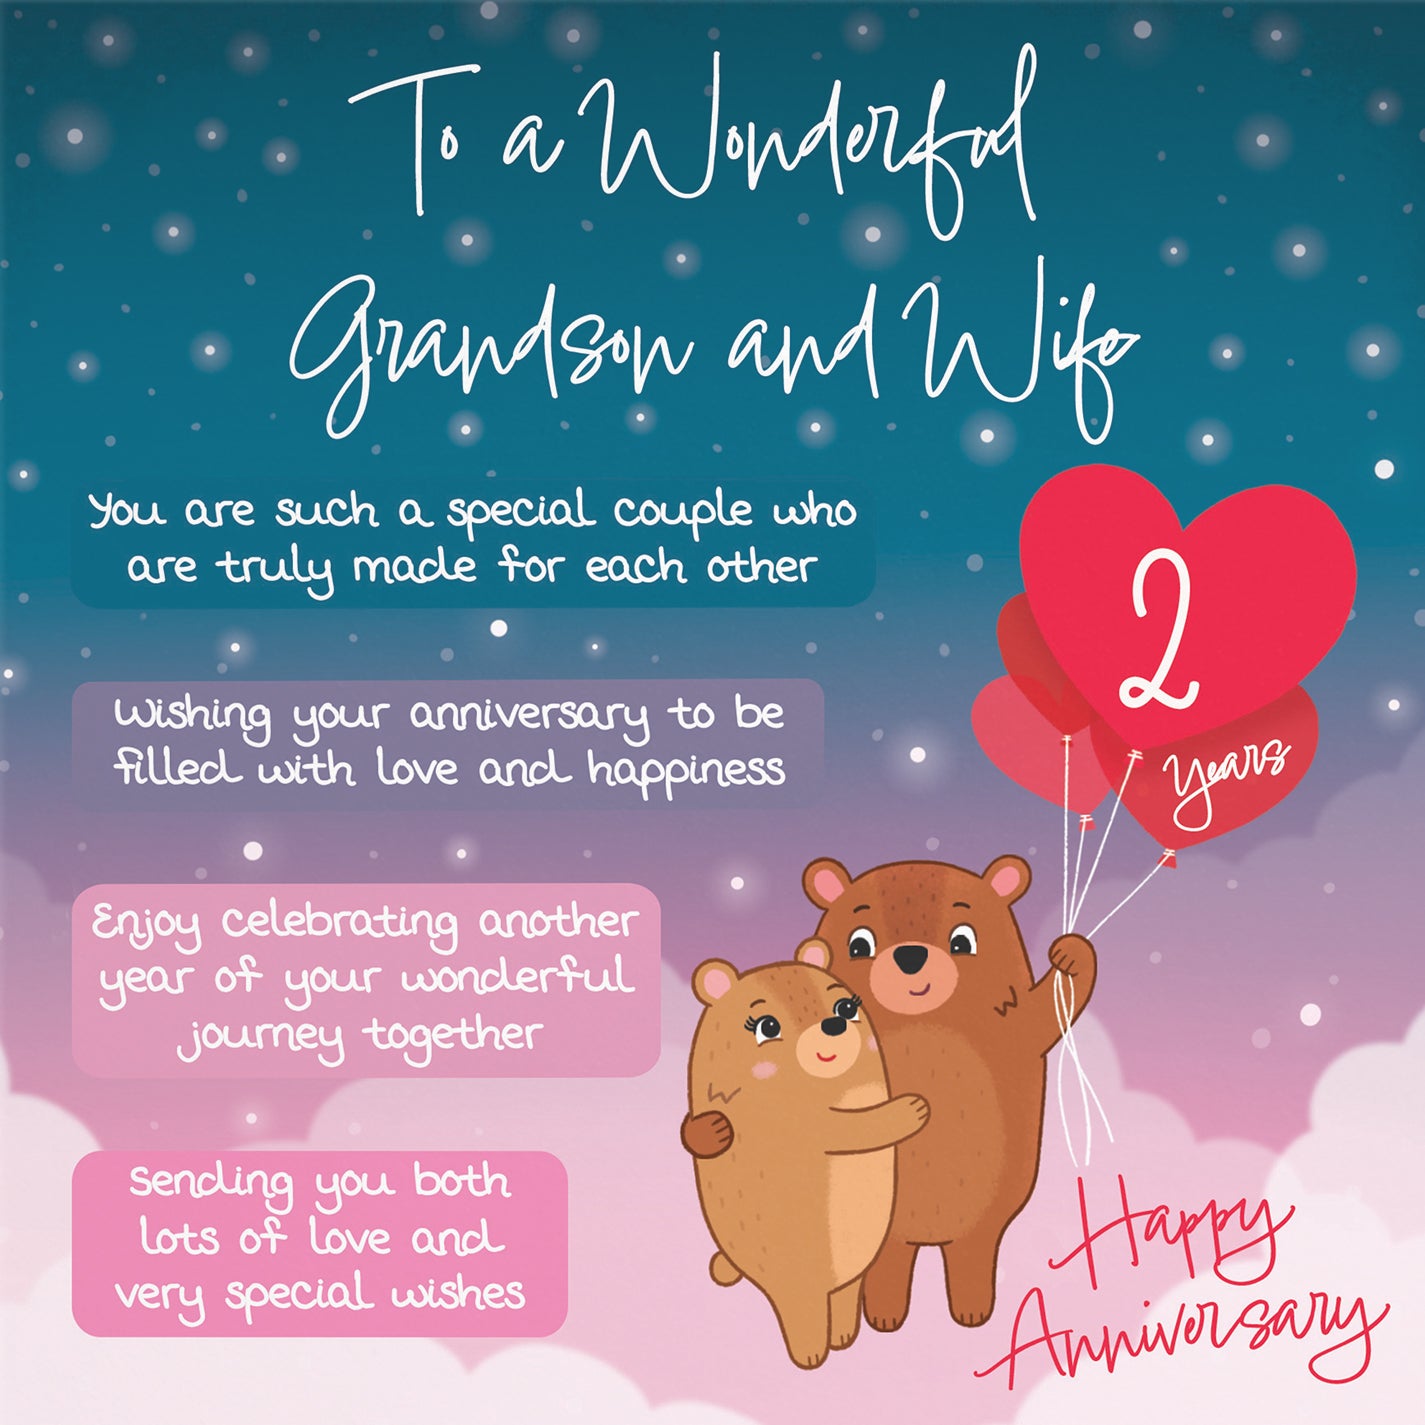 Grandson And Wife 2nd Anniversary Card Starry Night Cute Bears